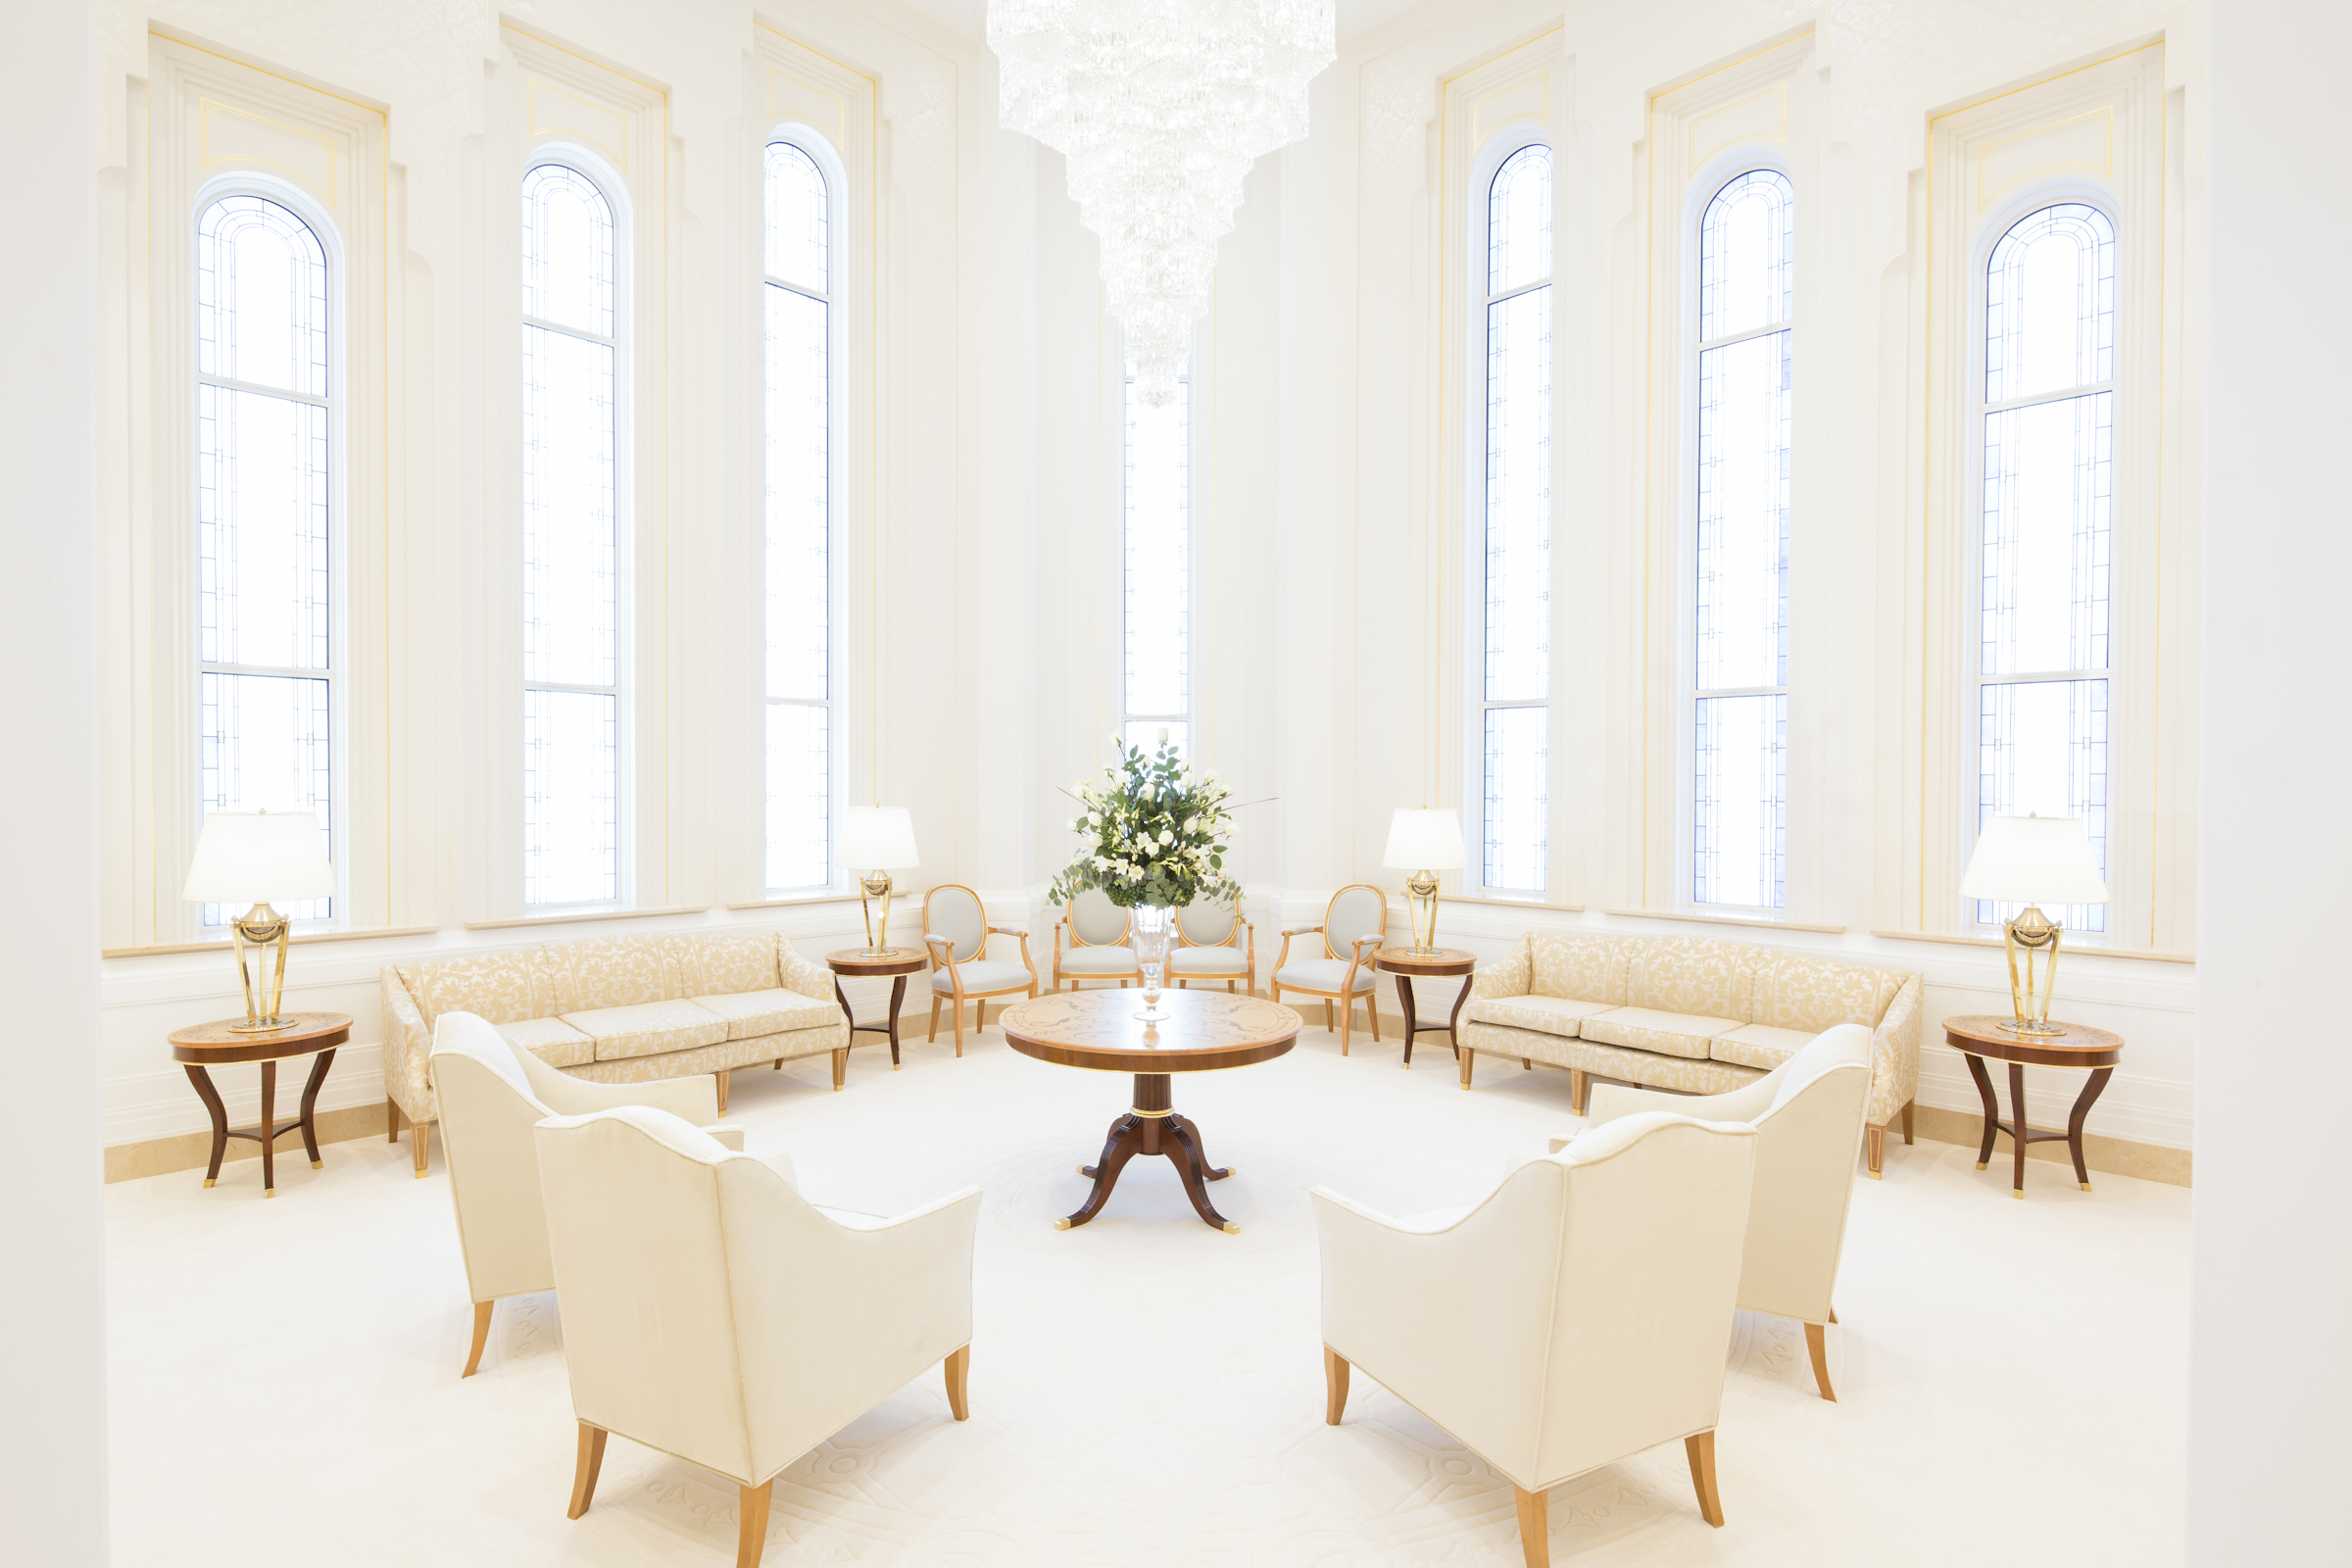 A white room inside the Buenos Aires Argentina Temple.